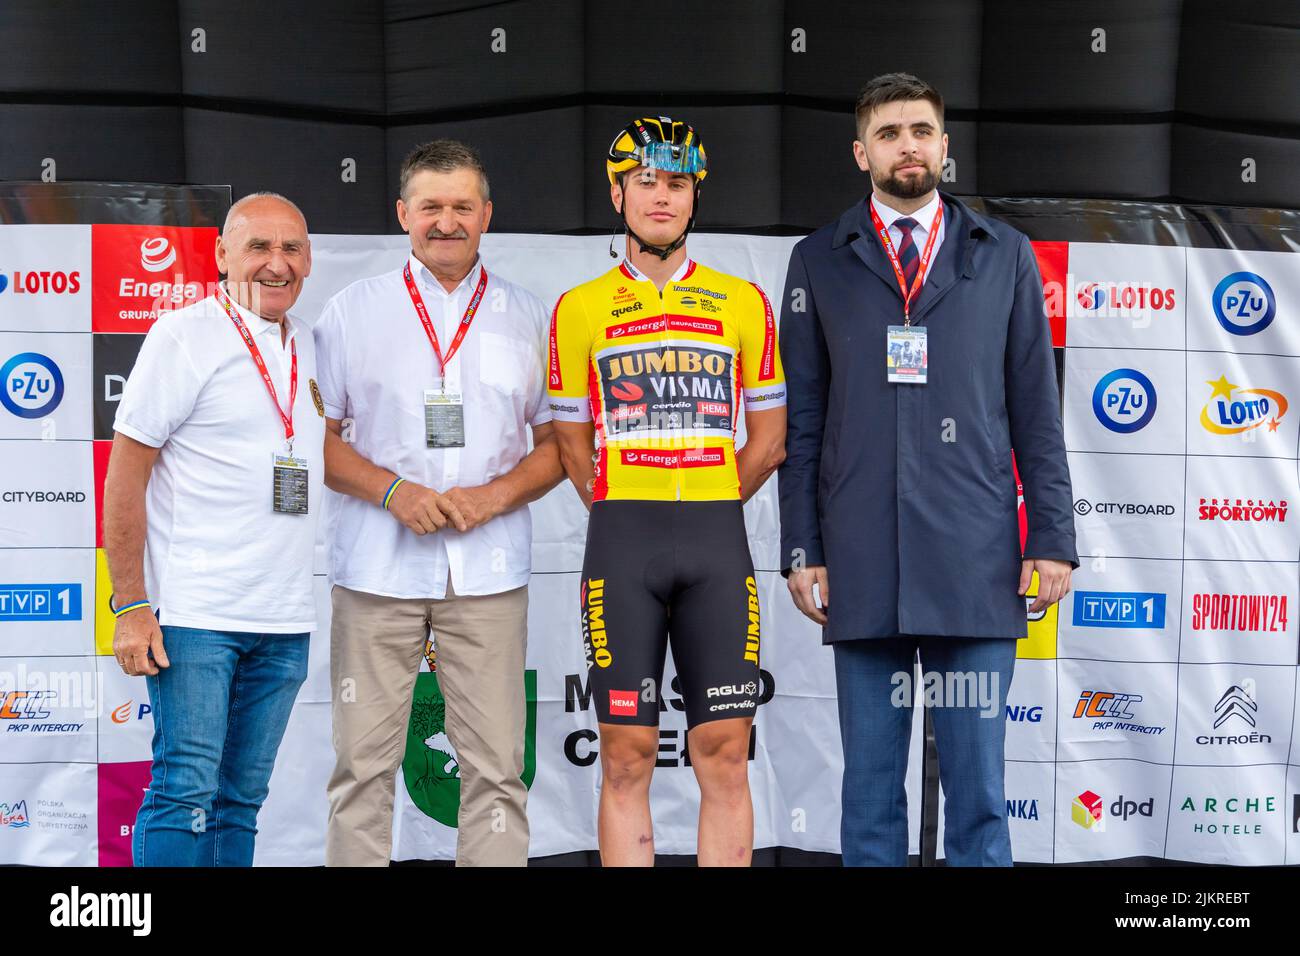 Chelm, Lubelskie, Poland - July 31, 2022: 79 tour de Pologne, Race Director Czeslaw Lang from the Councilor of the Lubelskie Voivodeship Zdzislaw Szwe Stock Photo